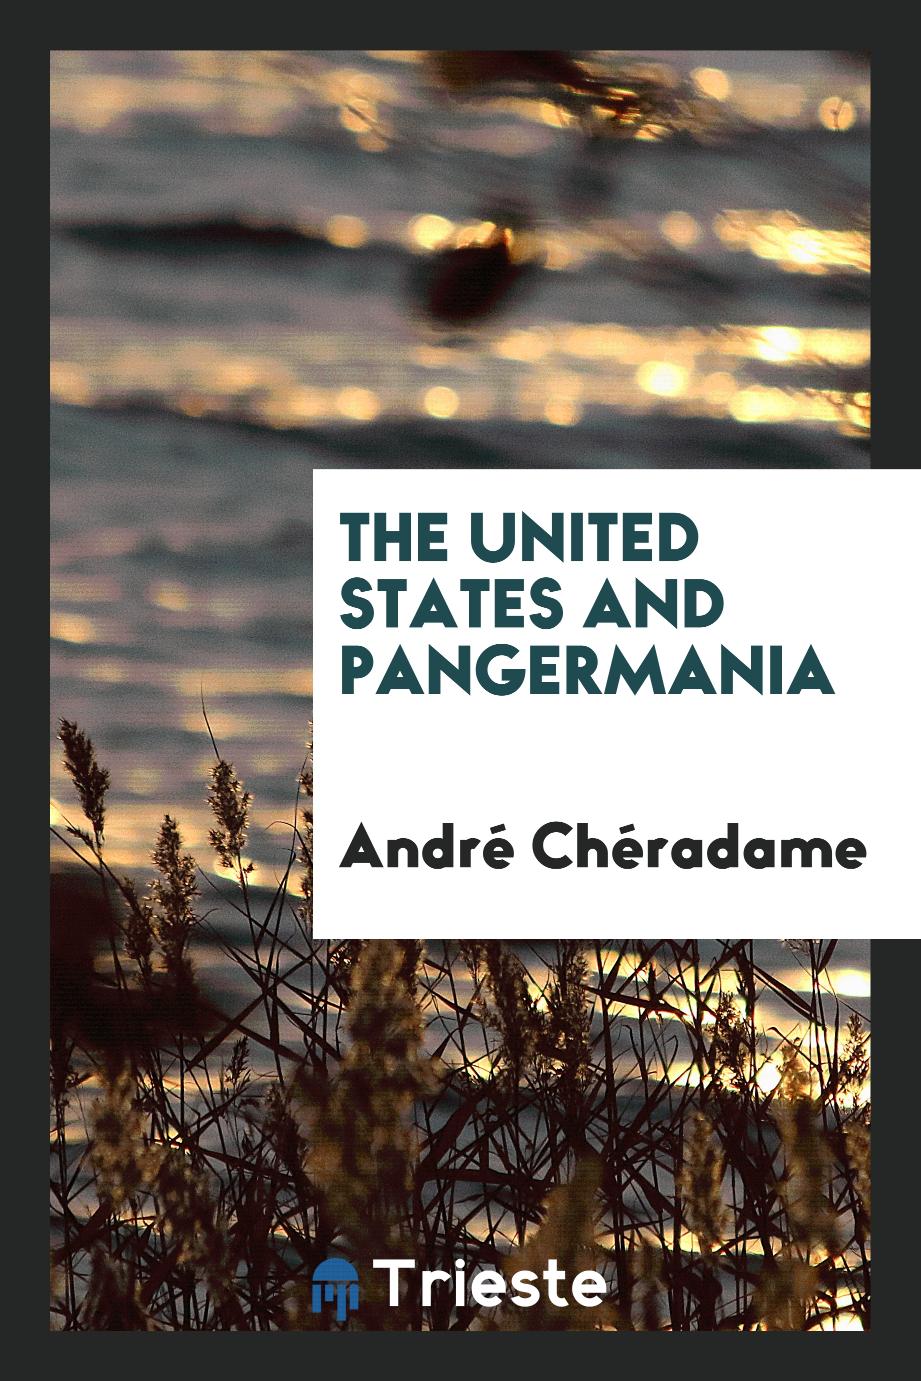 The United States and Pangermania